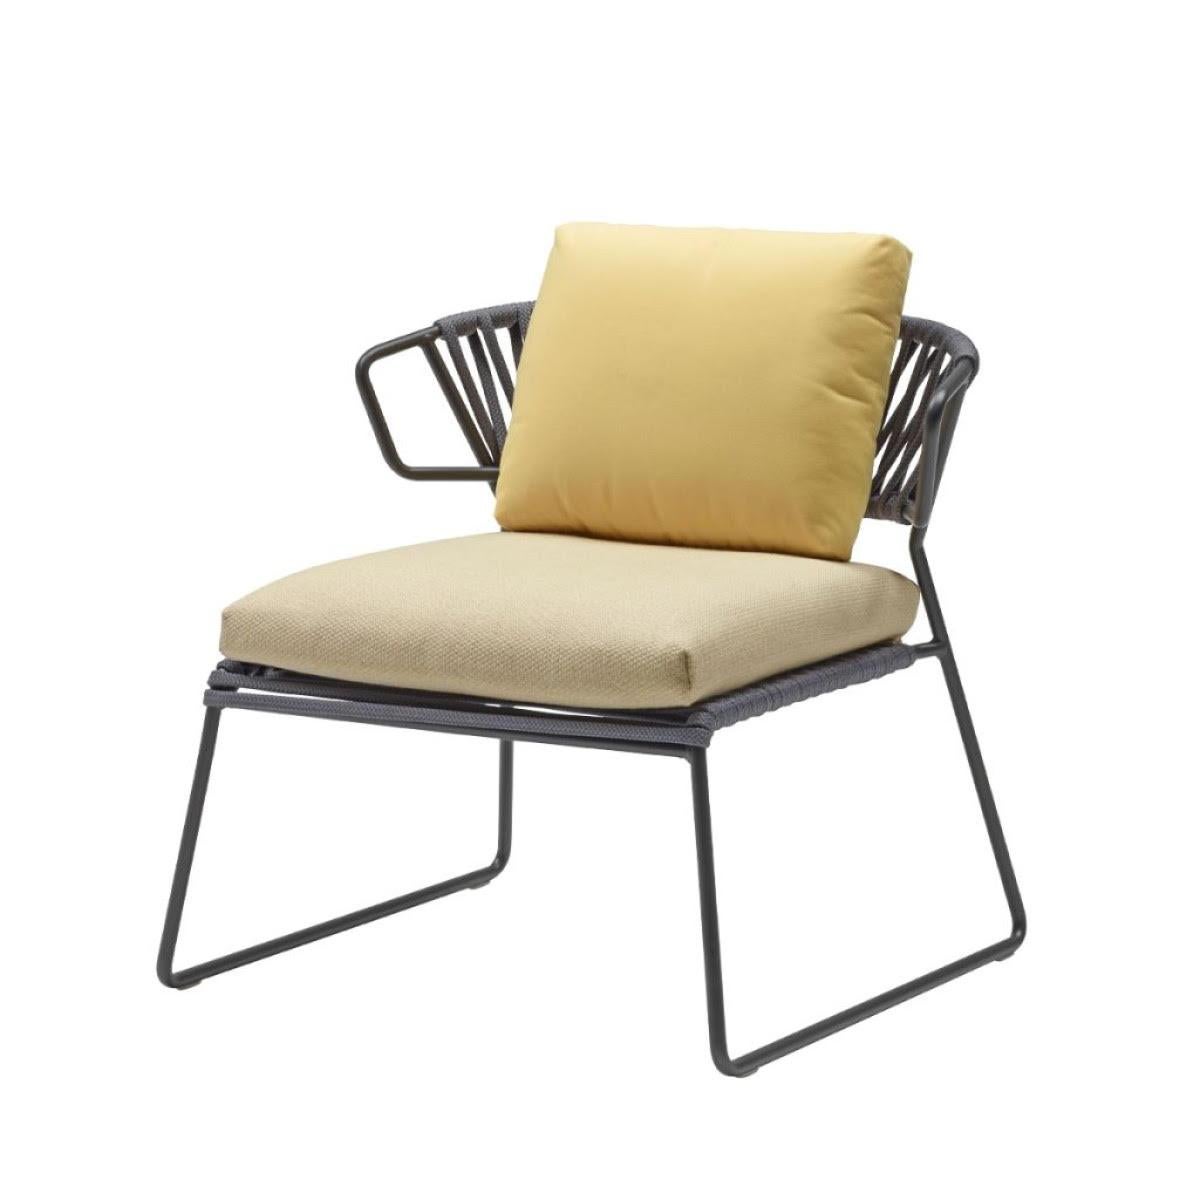 Modern Yellow Armchair Outdoor or Indoor in Metal and Ropes, 21 century
Modern production armchair for outdoor or indoor use. The structure is made of metal and reinforced by ropes on the back and seat. This armchair has an innovative, modern and